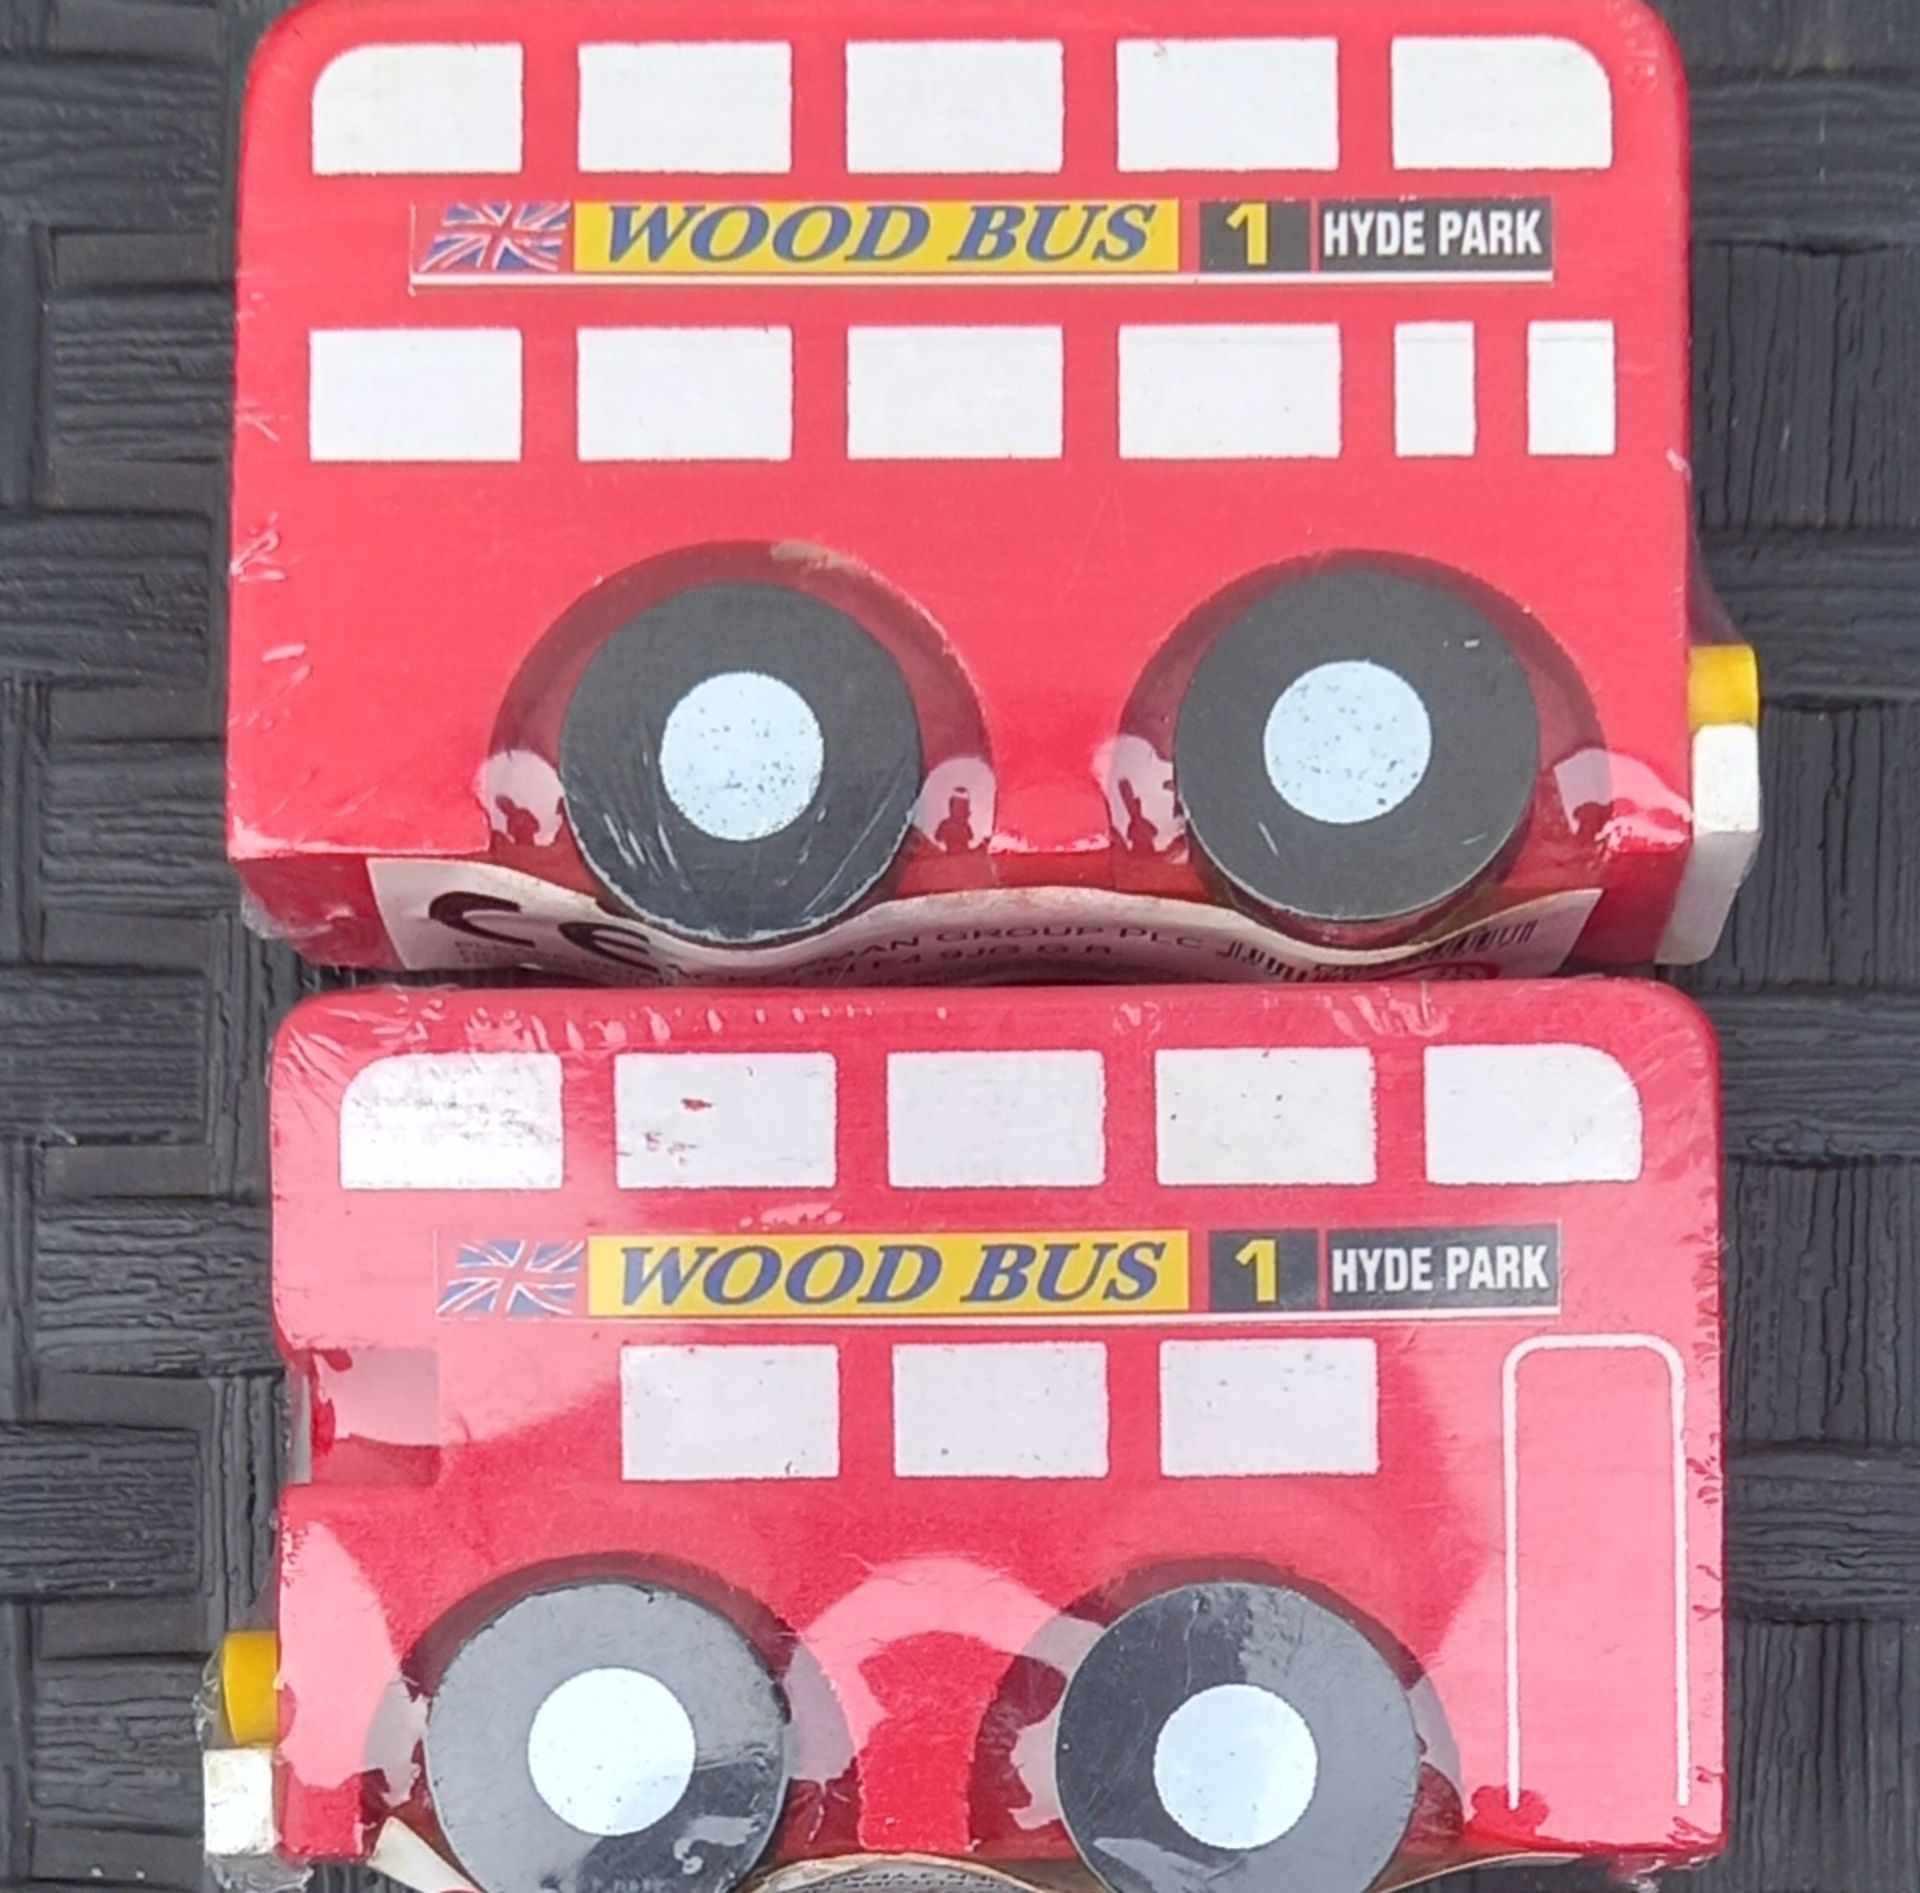 3 Brand New Wooden London Buses.